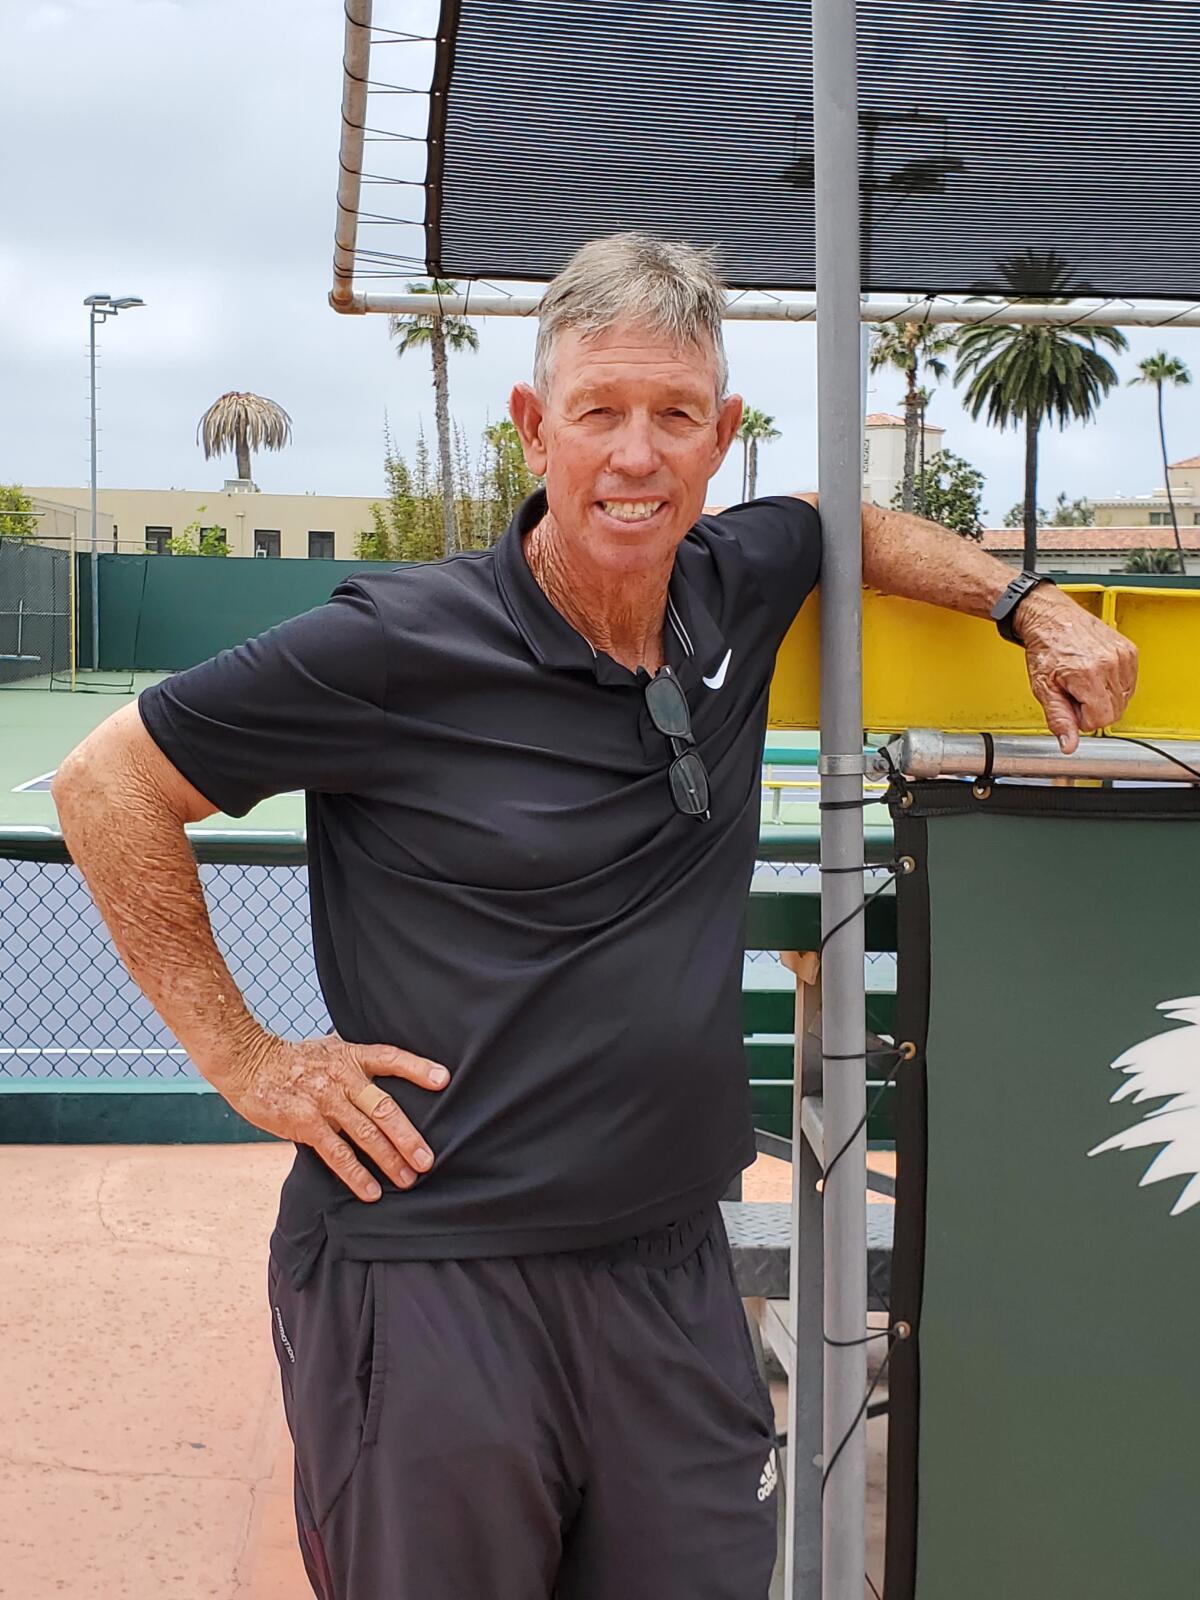 Mike Van Zutphen is manager and the director of tennis for the La Jolla Tennis Club.